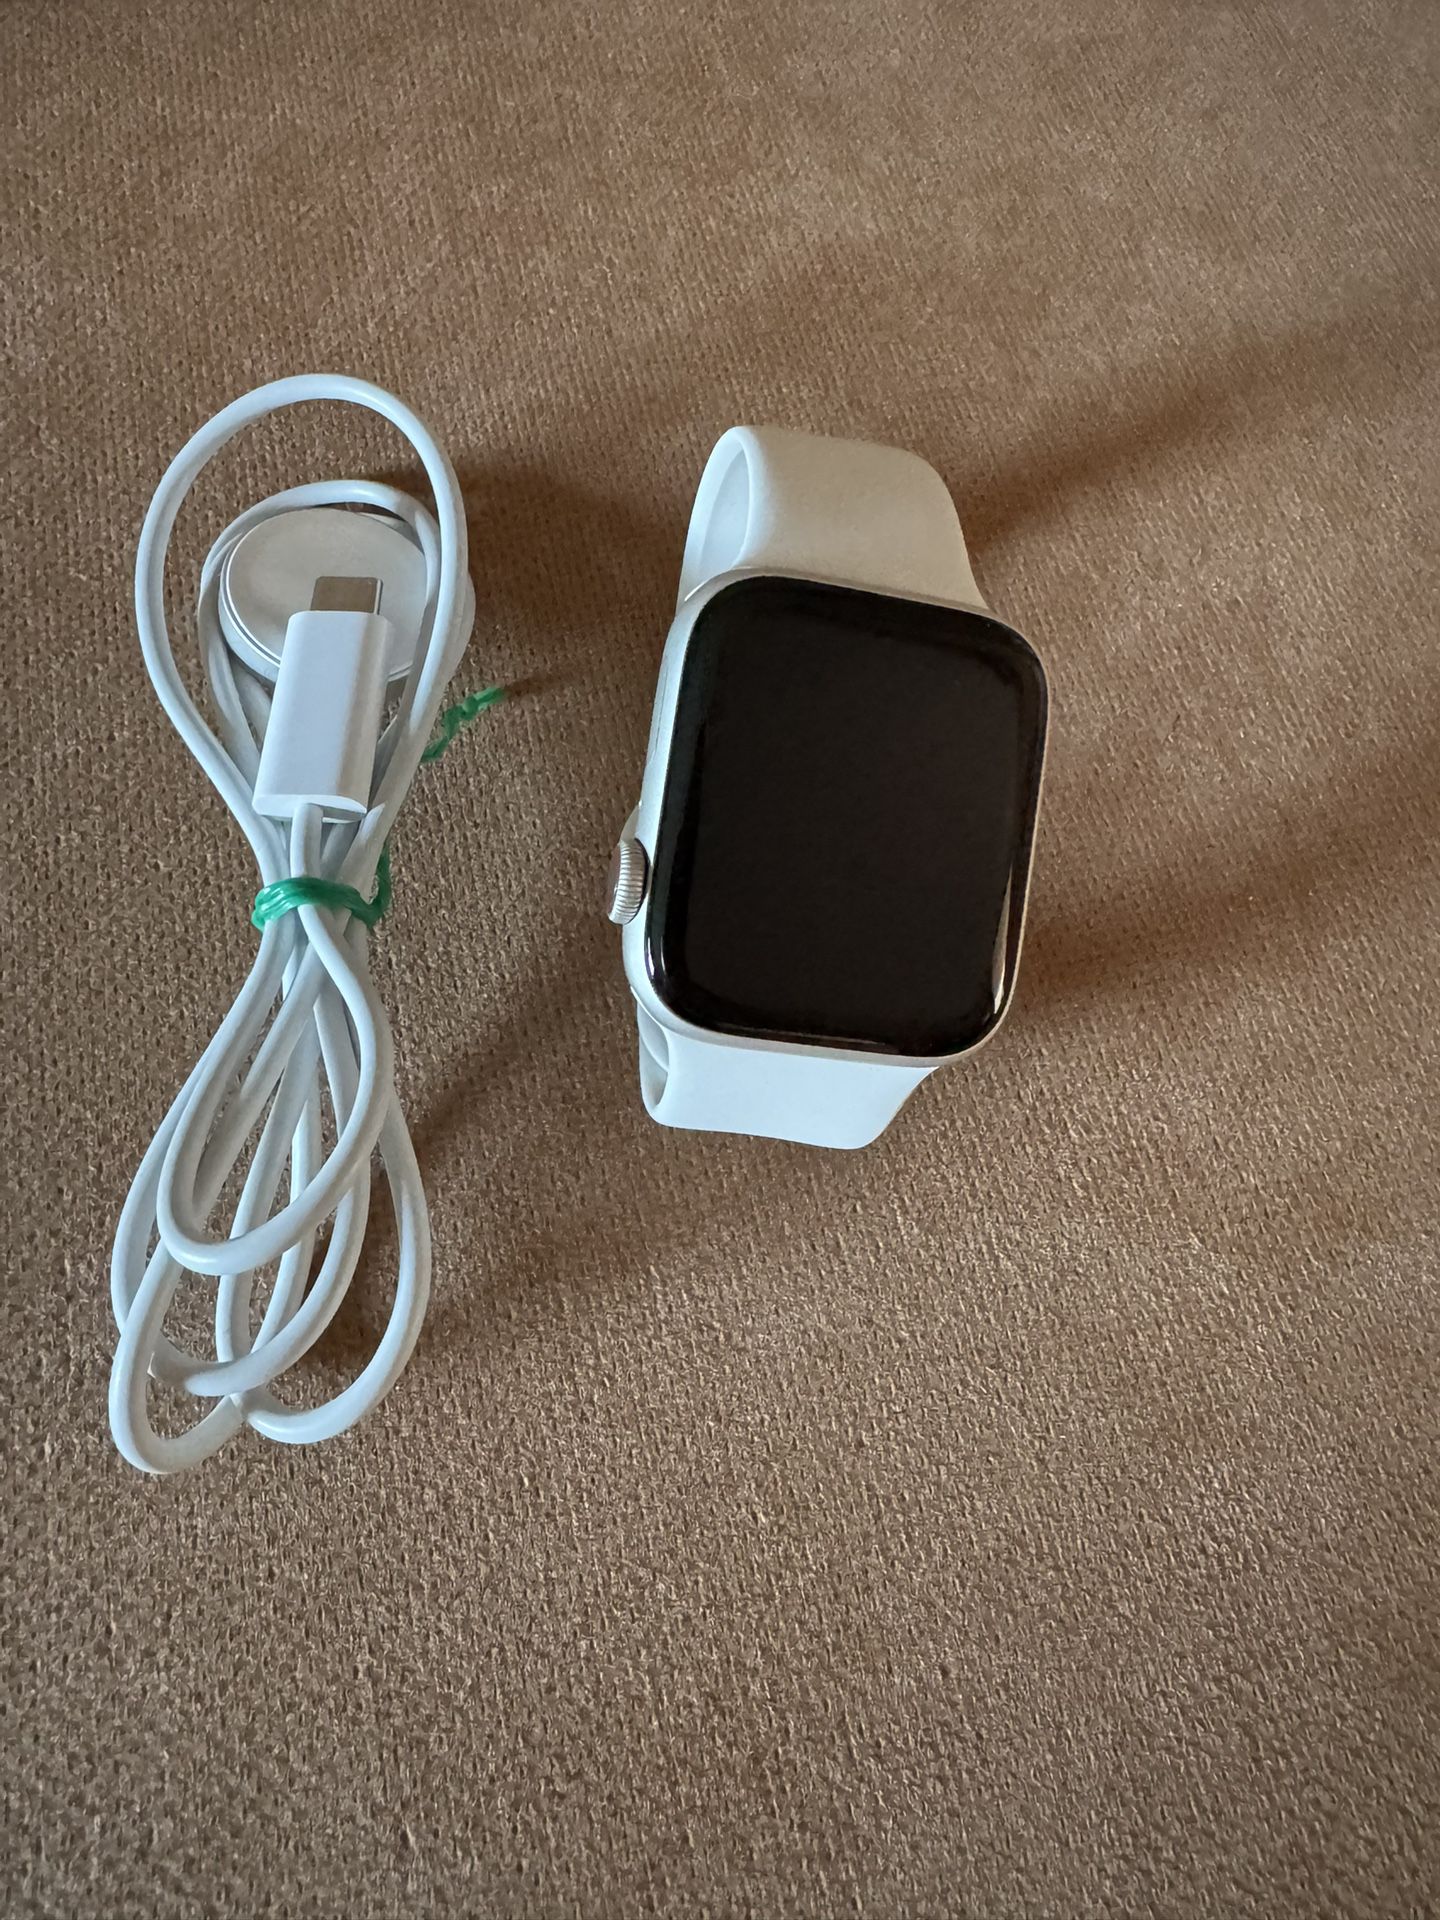 Apple Watch Series 5 44mm white gps and cellular unlocked 